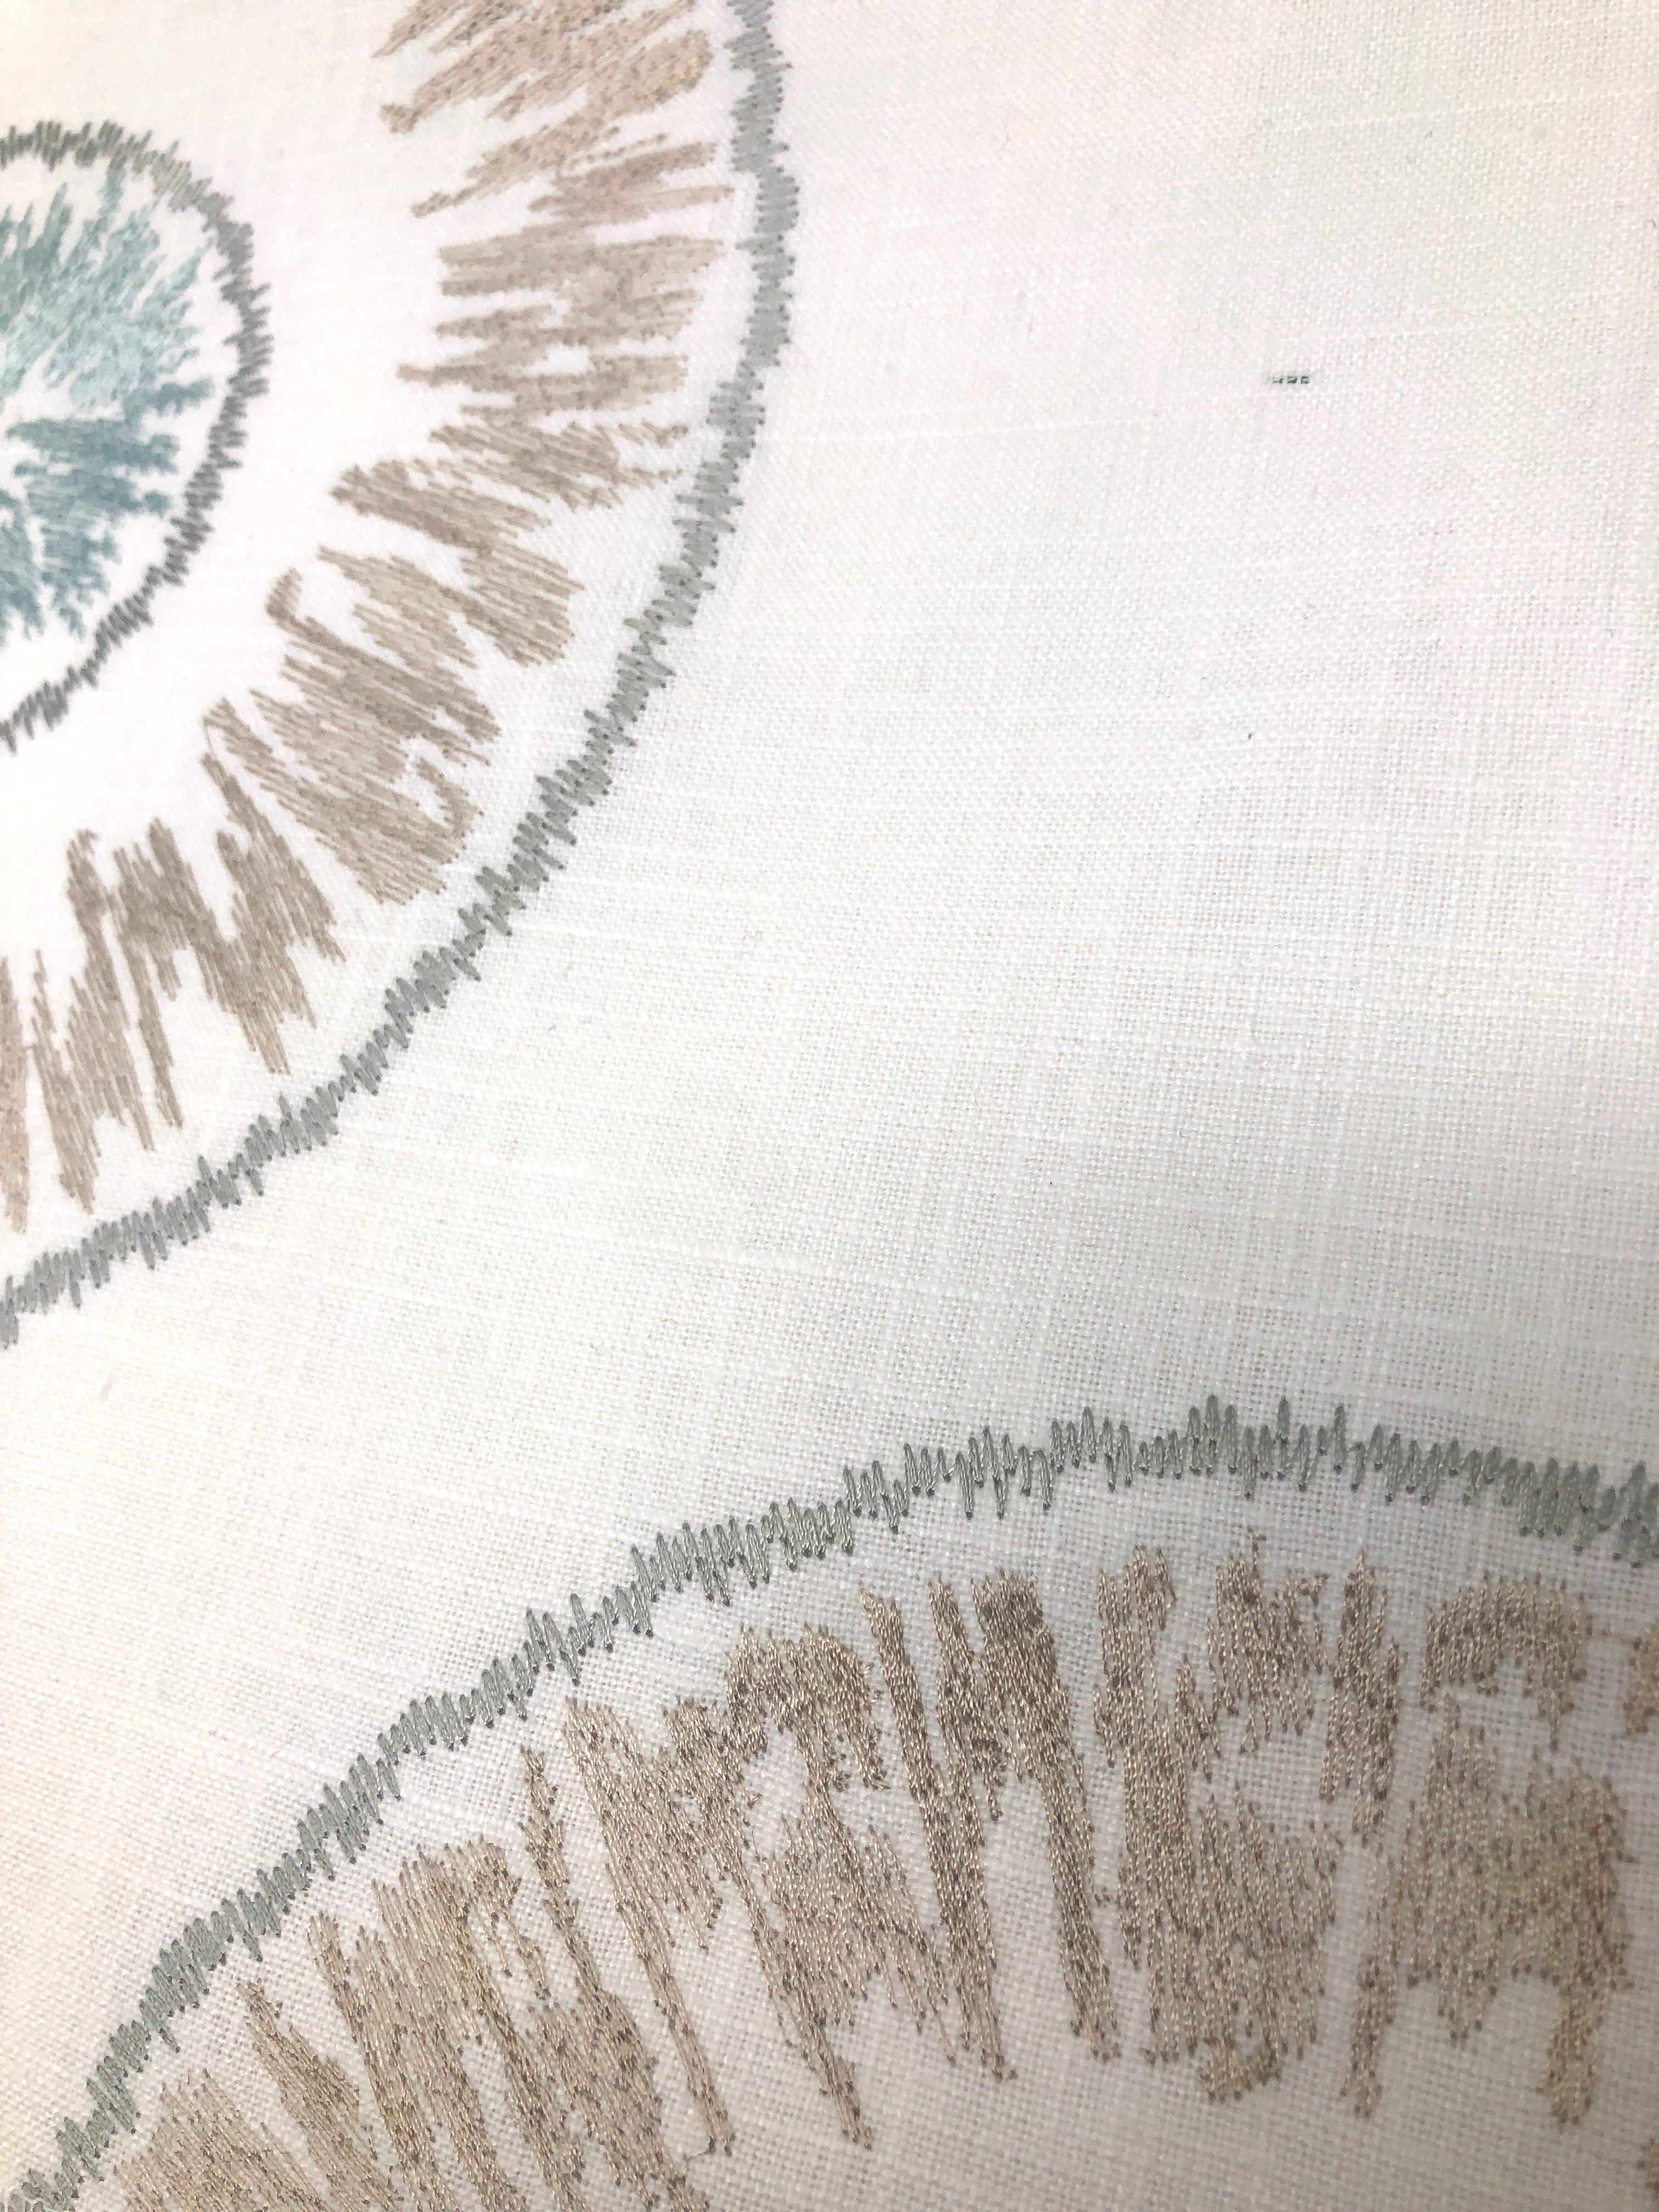 Retro Stitch round Embroidery Linen Blend Fabric By The Yard, Curtain, Drapery, Table Top, 54" Width/CL1018